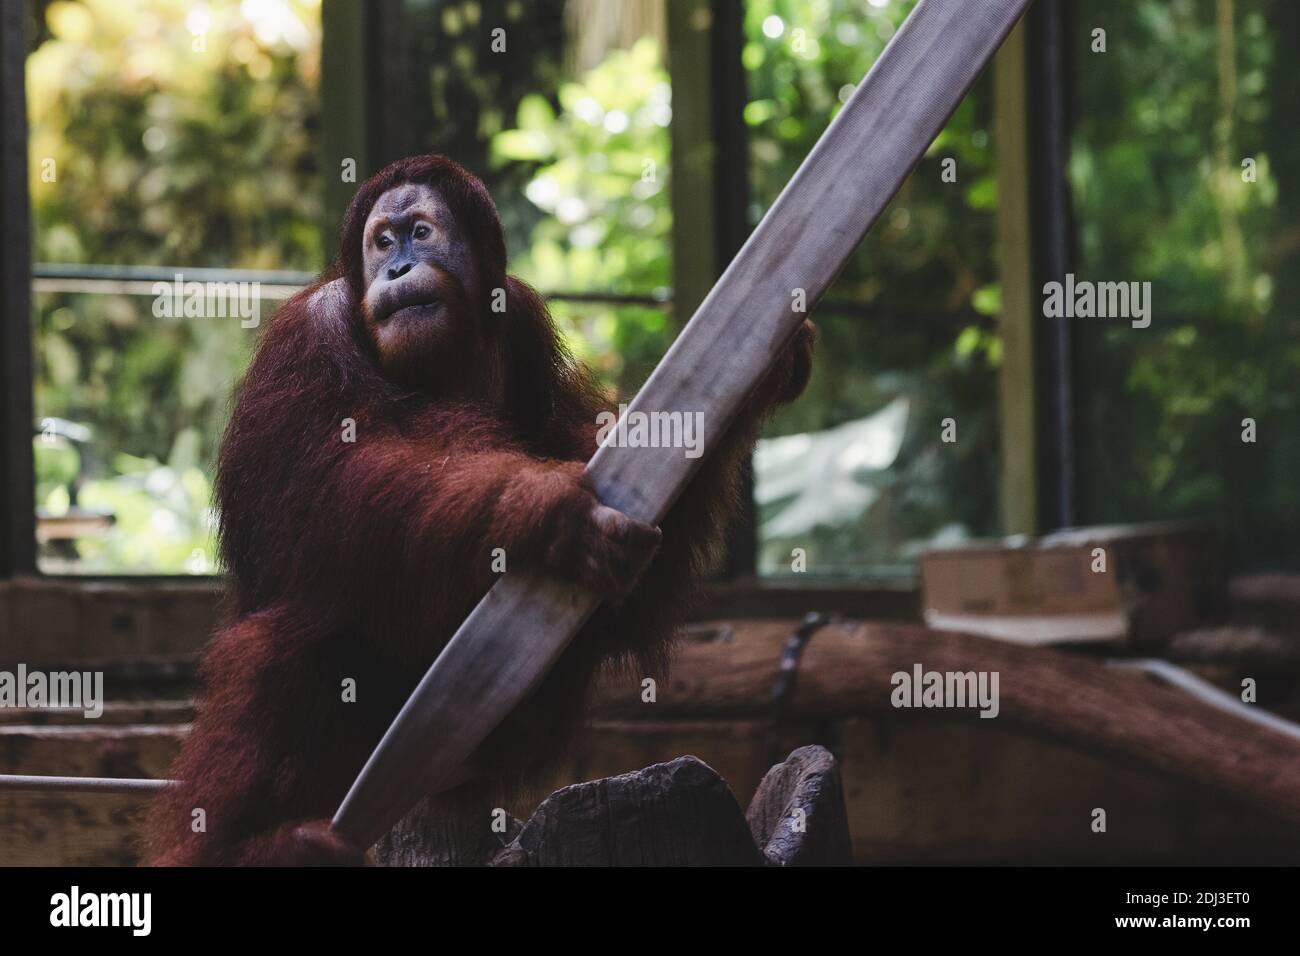 rescued orangutan looks to the side Stock Photo